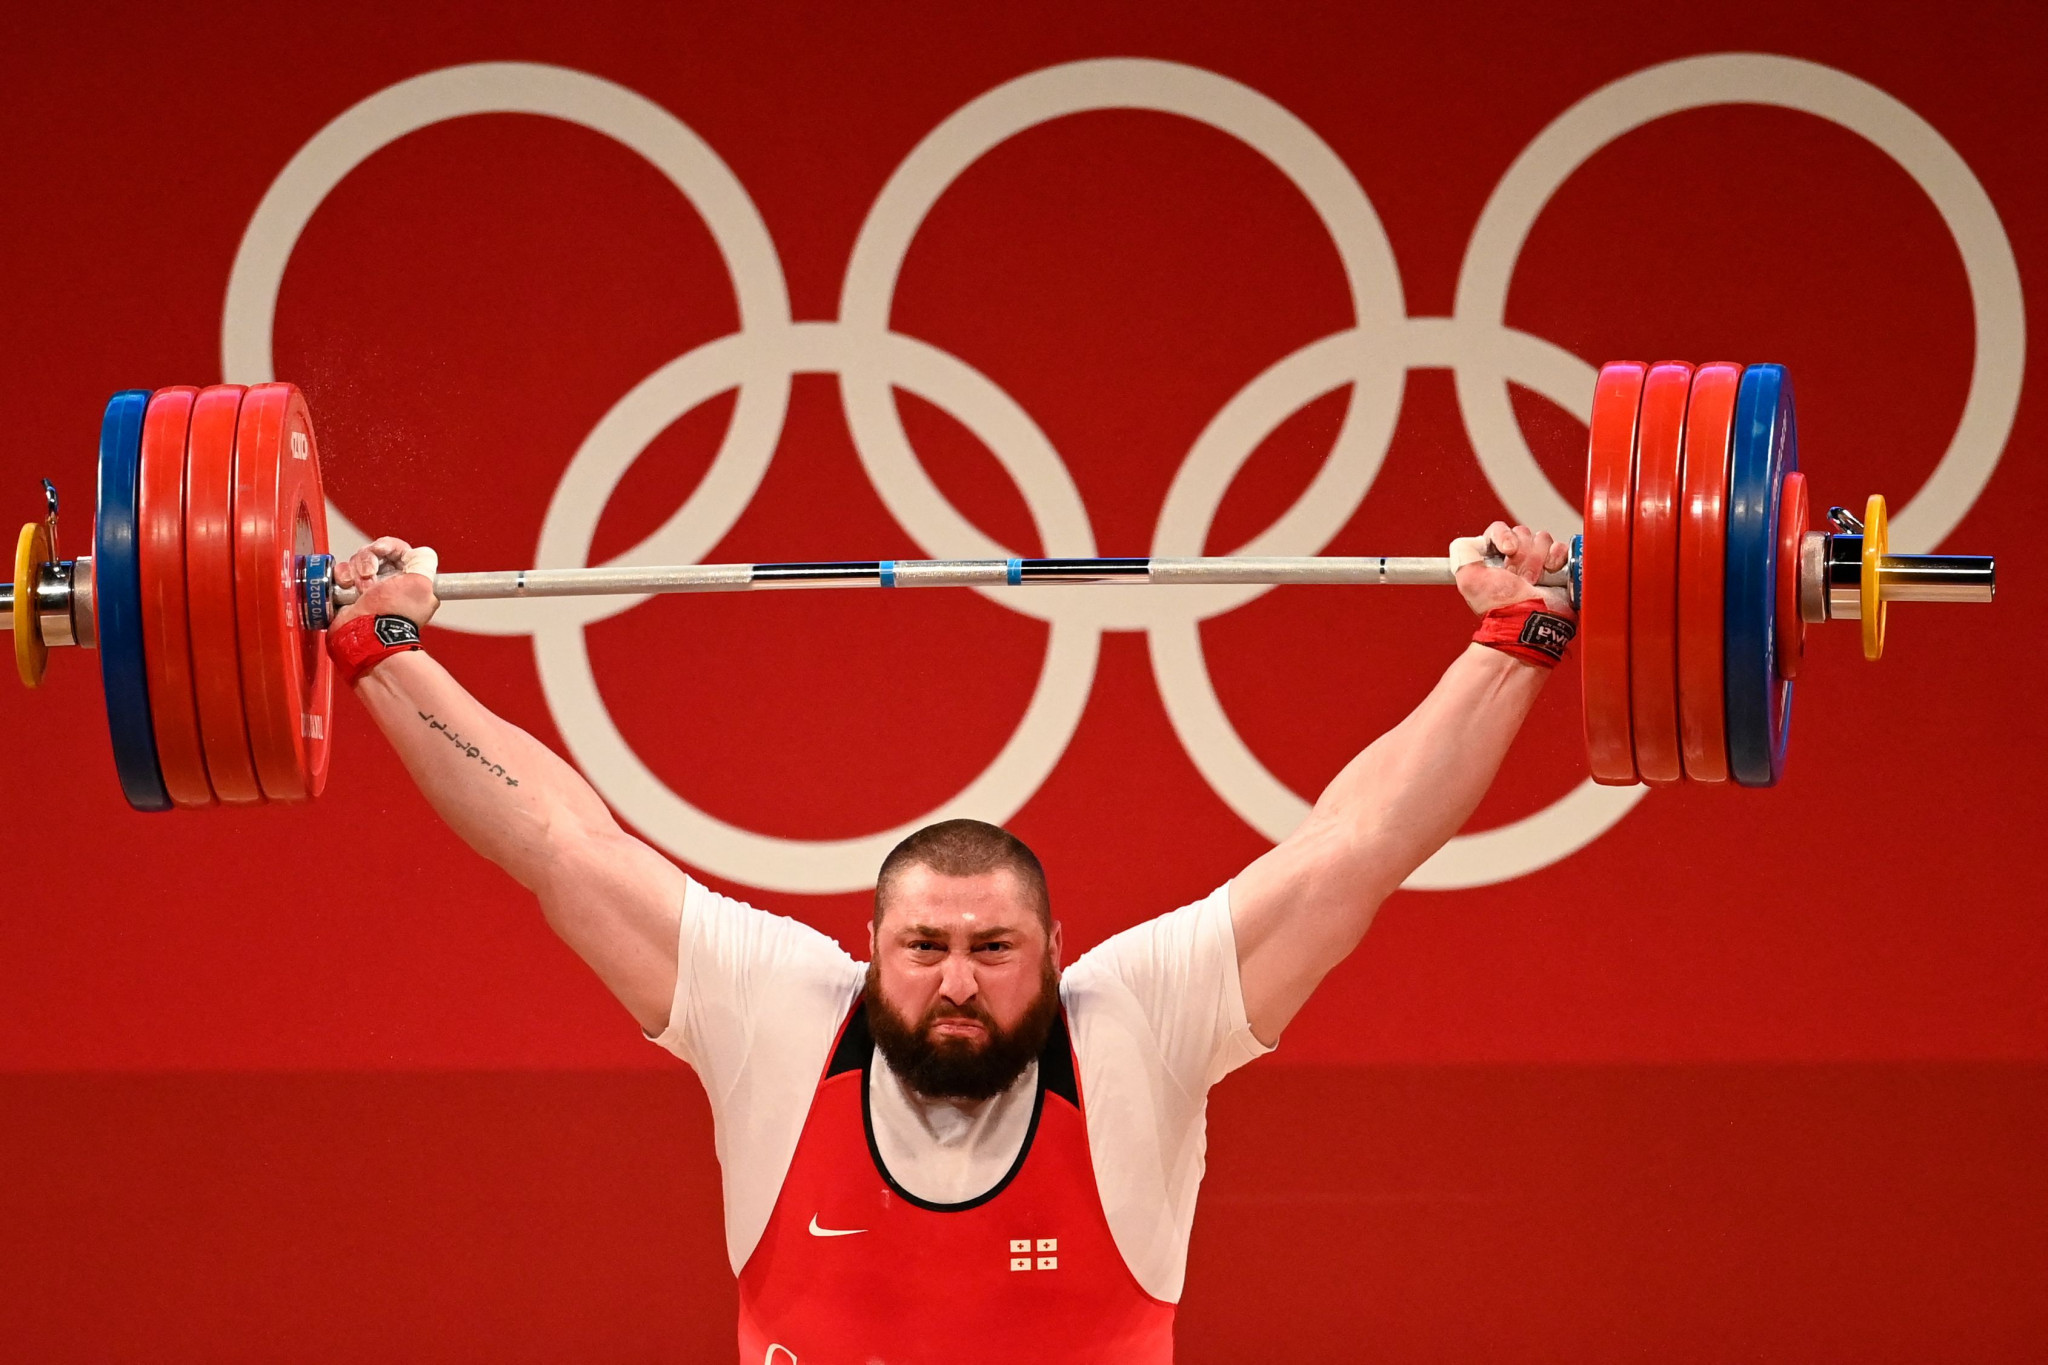 Weightlifting is expected to retain its place on the Olympic programme at Los Angeles 2028 ©Getty Images